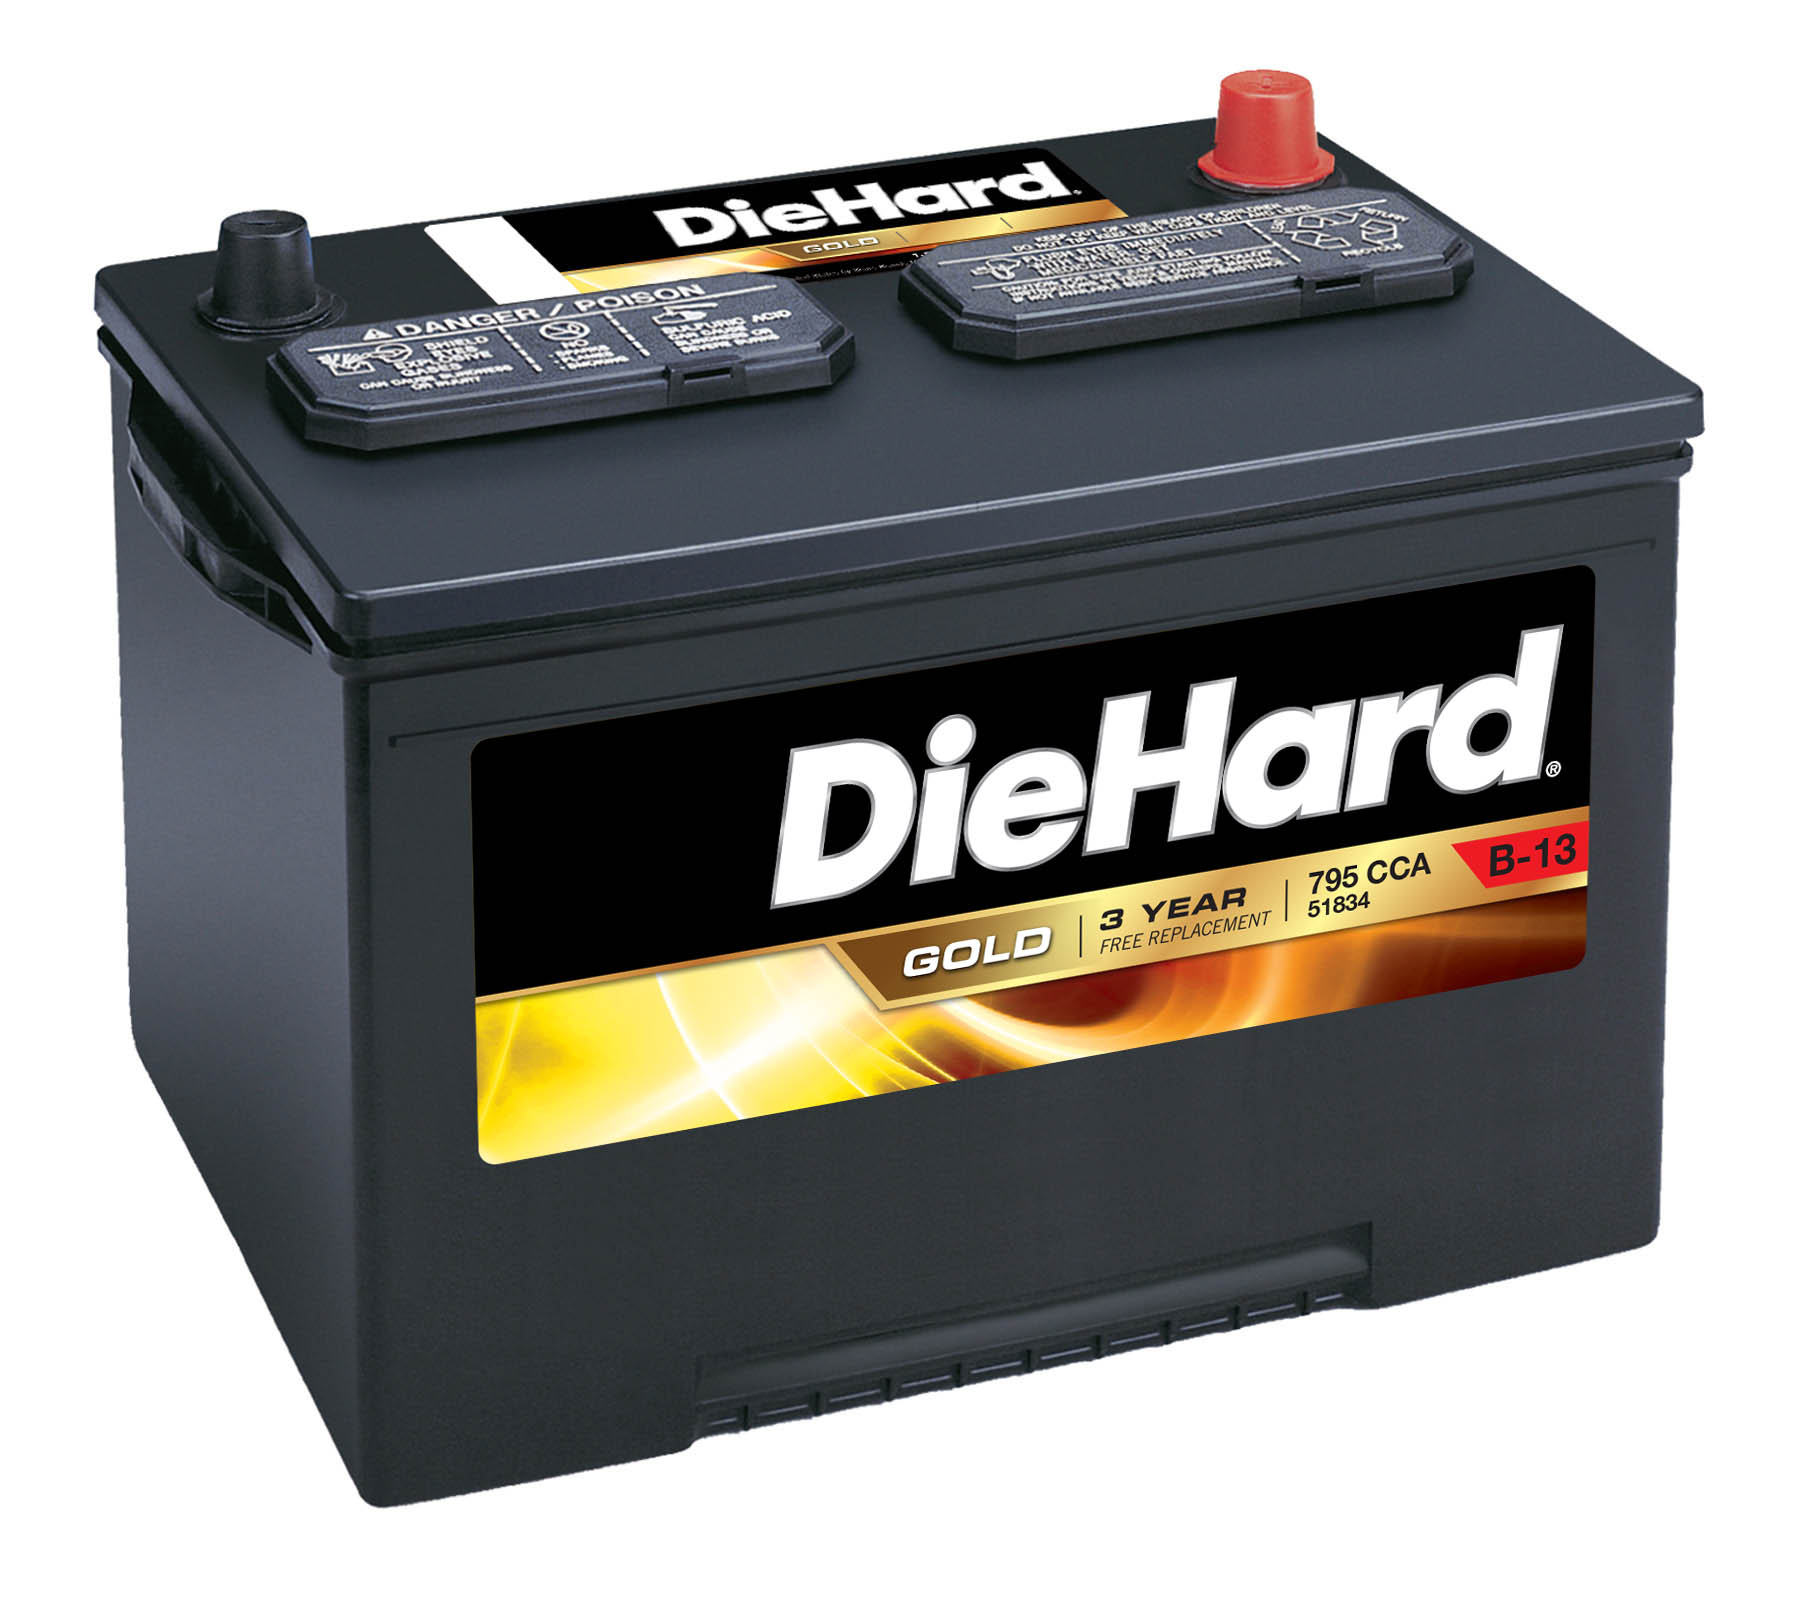 DieHard Gold Automotive Battery - Group Size JC-34 (Price with Exchange)